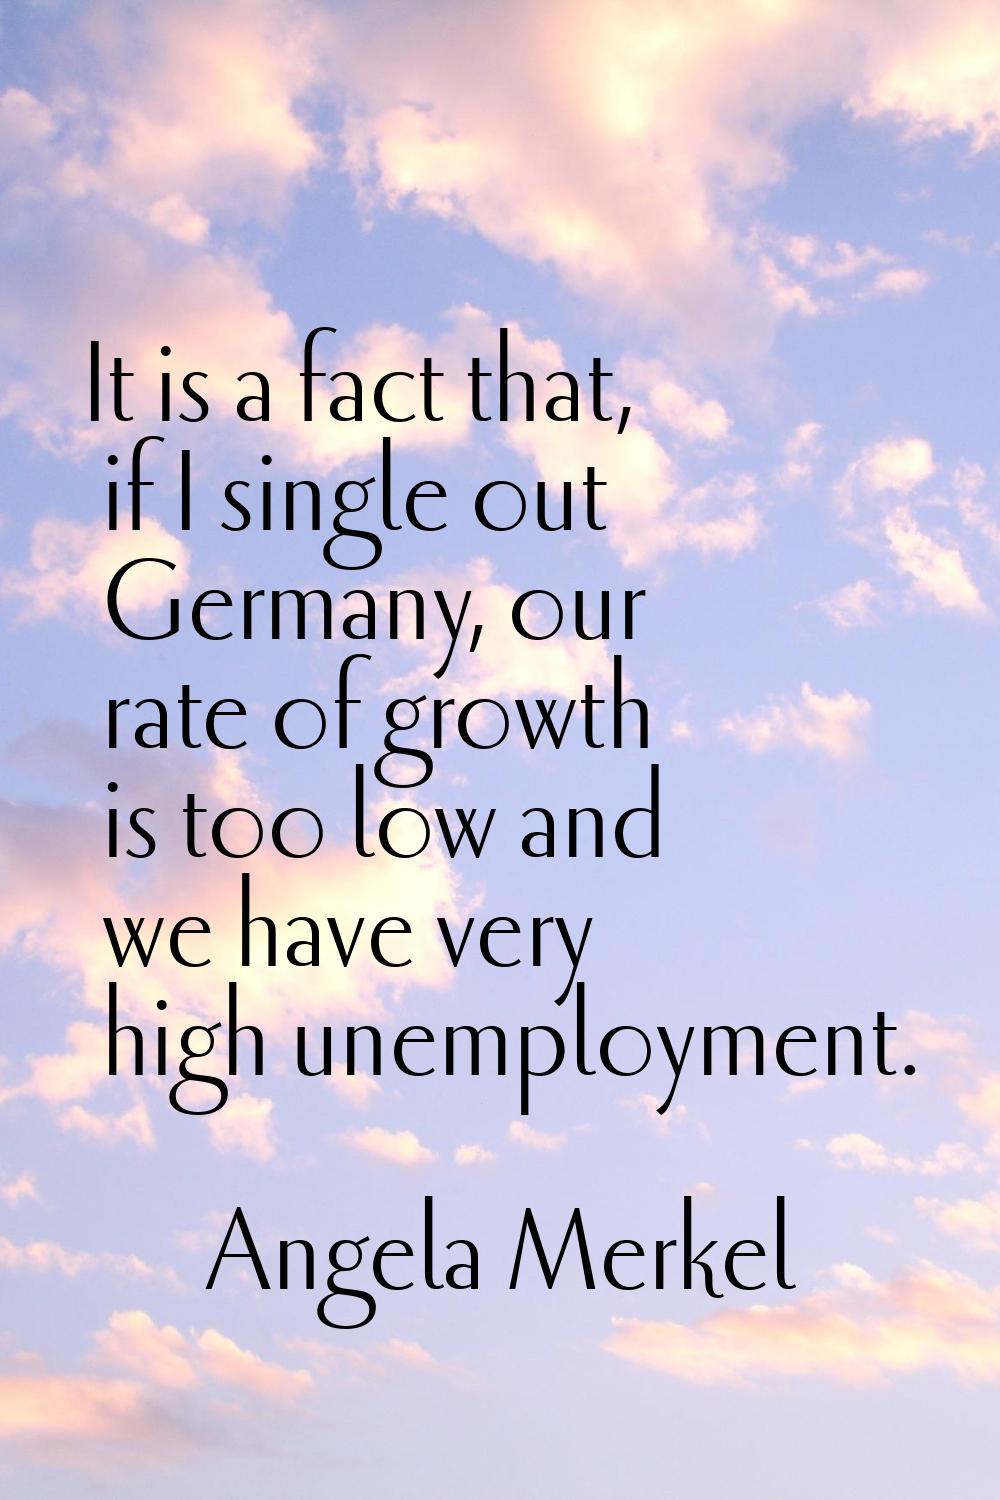 It is a fact that, if I single out Germany, our rate of growth is too low and we have very high une